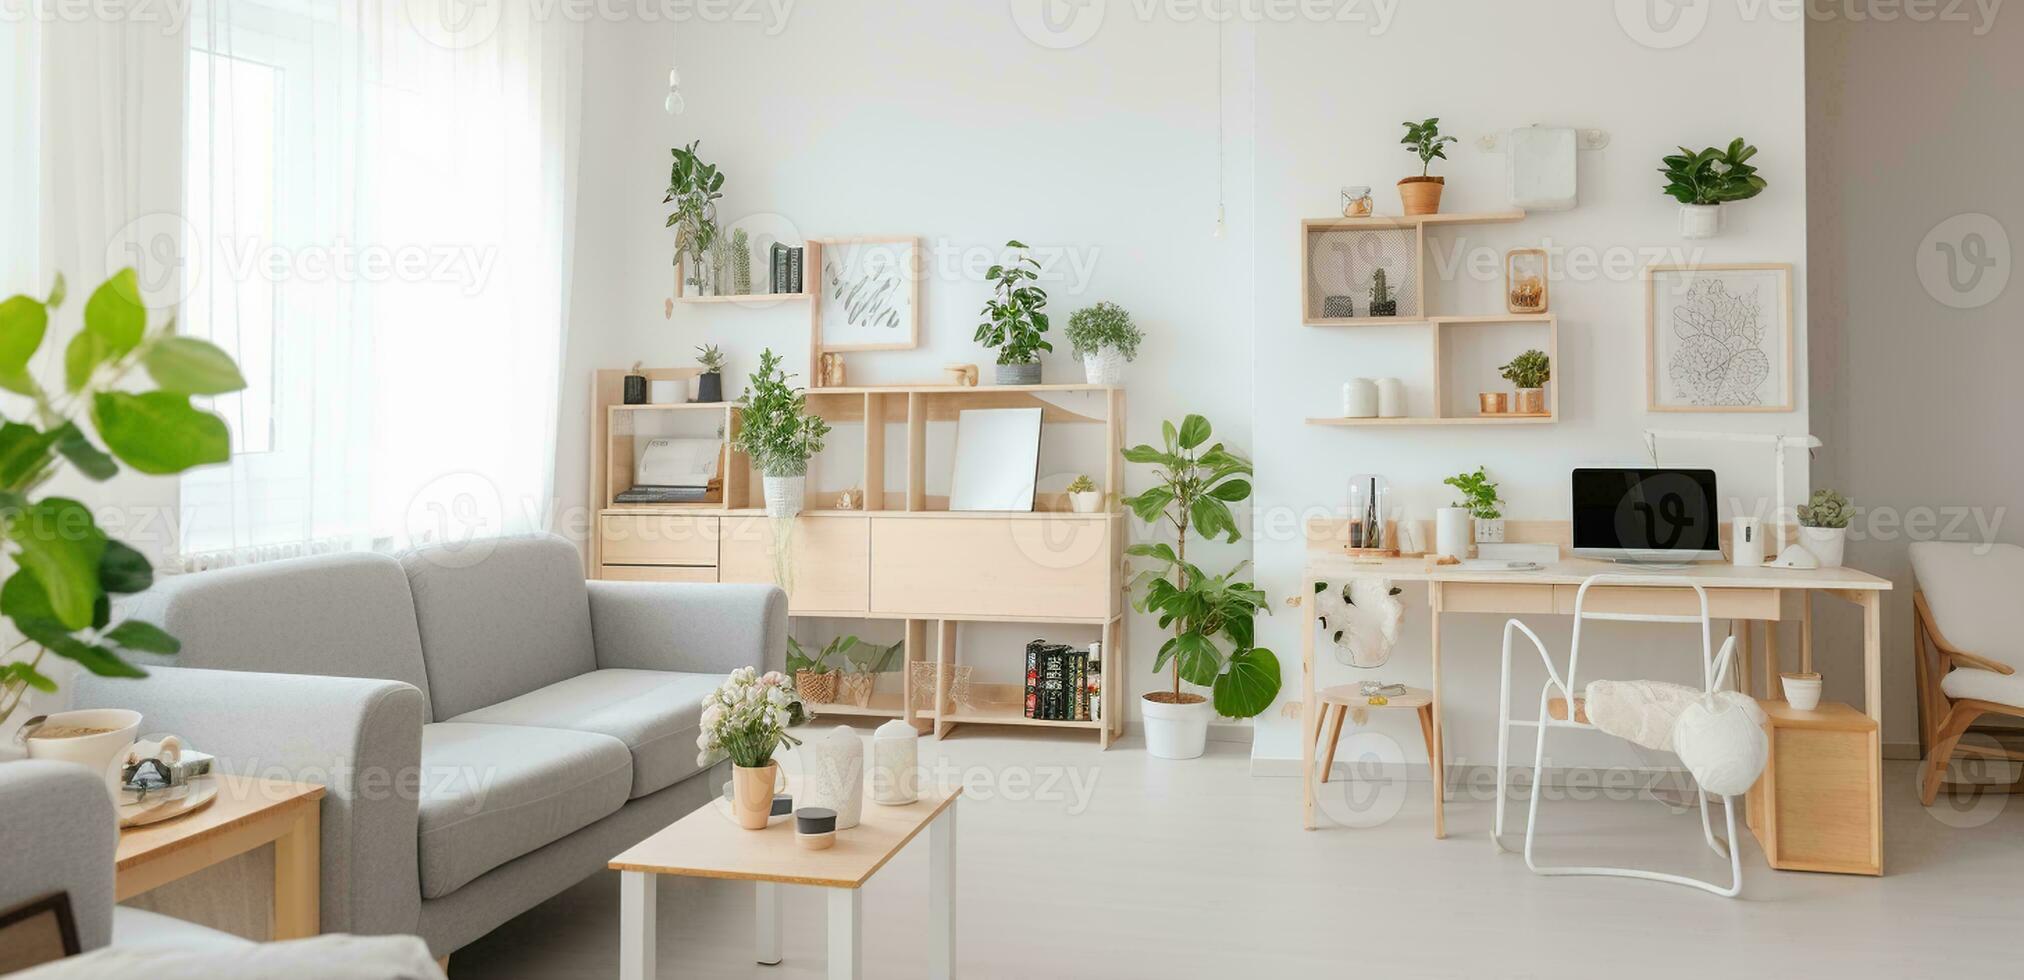 White open space flat interior with grey sofa, wooden cupboards with plants and decor, study corner desk with empty computer screen photo